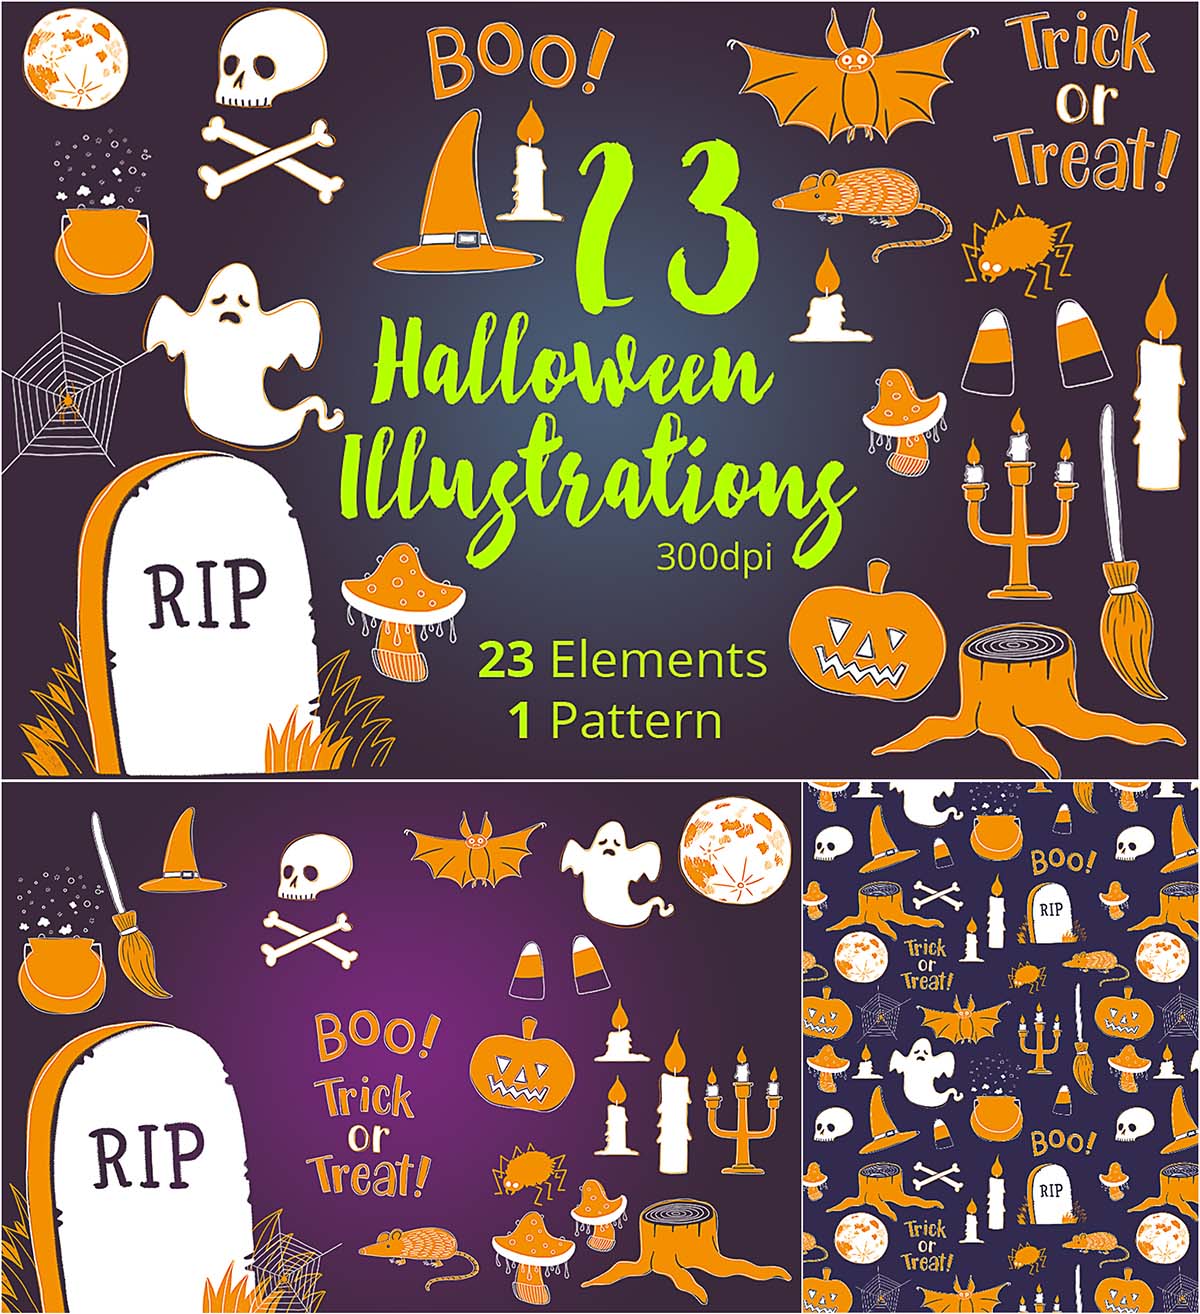 Haloween pattern and illustrations